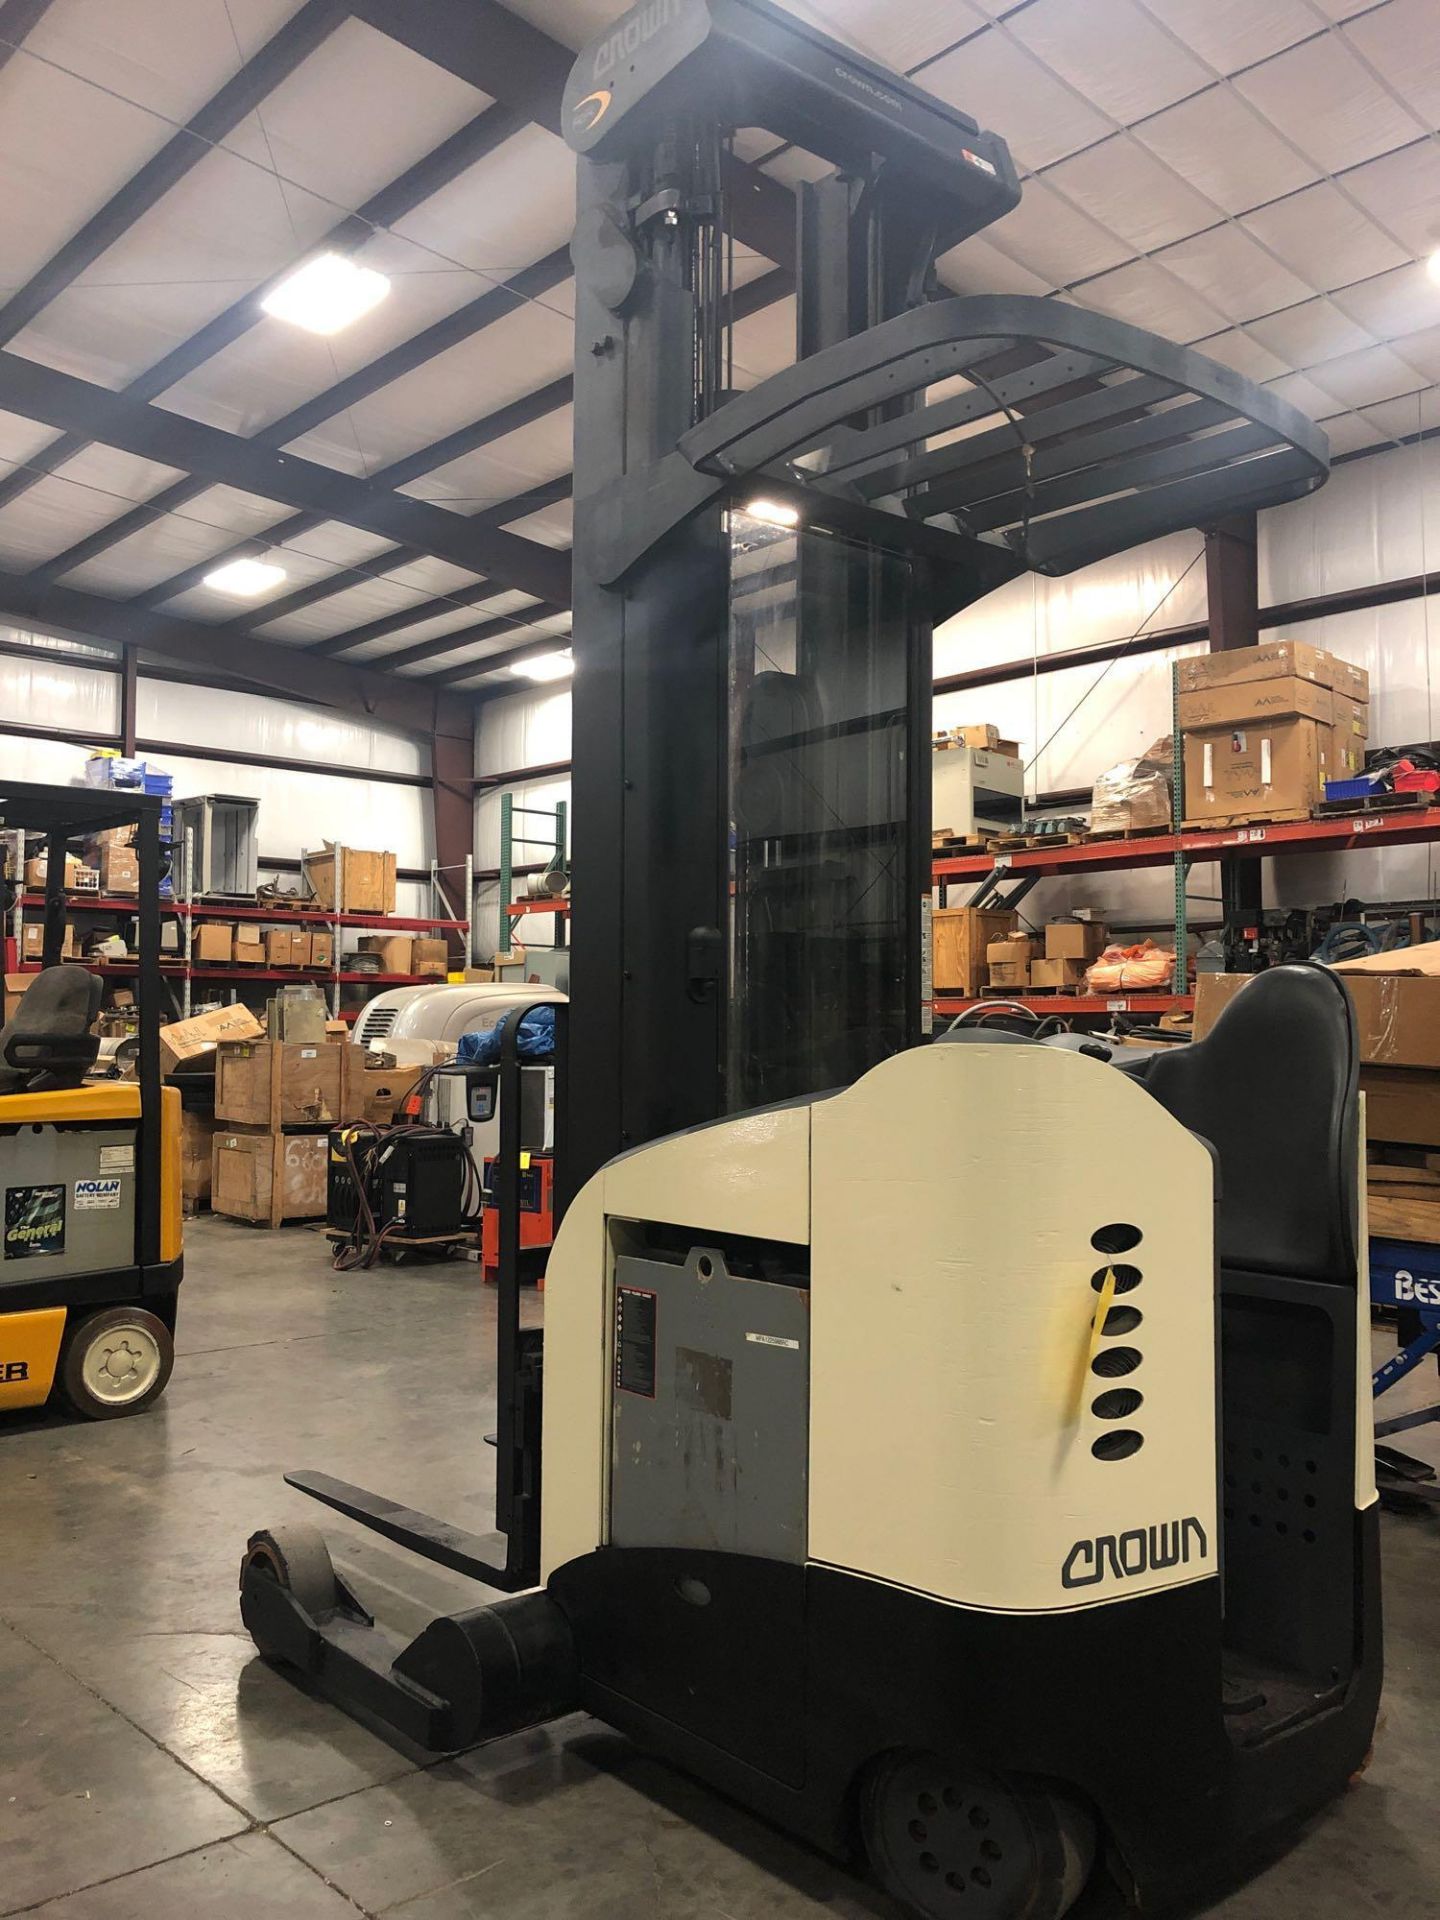 CROWN ELECTRIC REACH FORKLIFT MODEL RR5220-45 RR 5200 SERIES, APPROX. 5,000 LB CAPACITY, 300" HEIGHT - Image 2 of 8